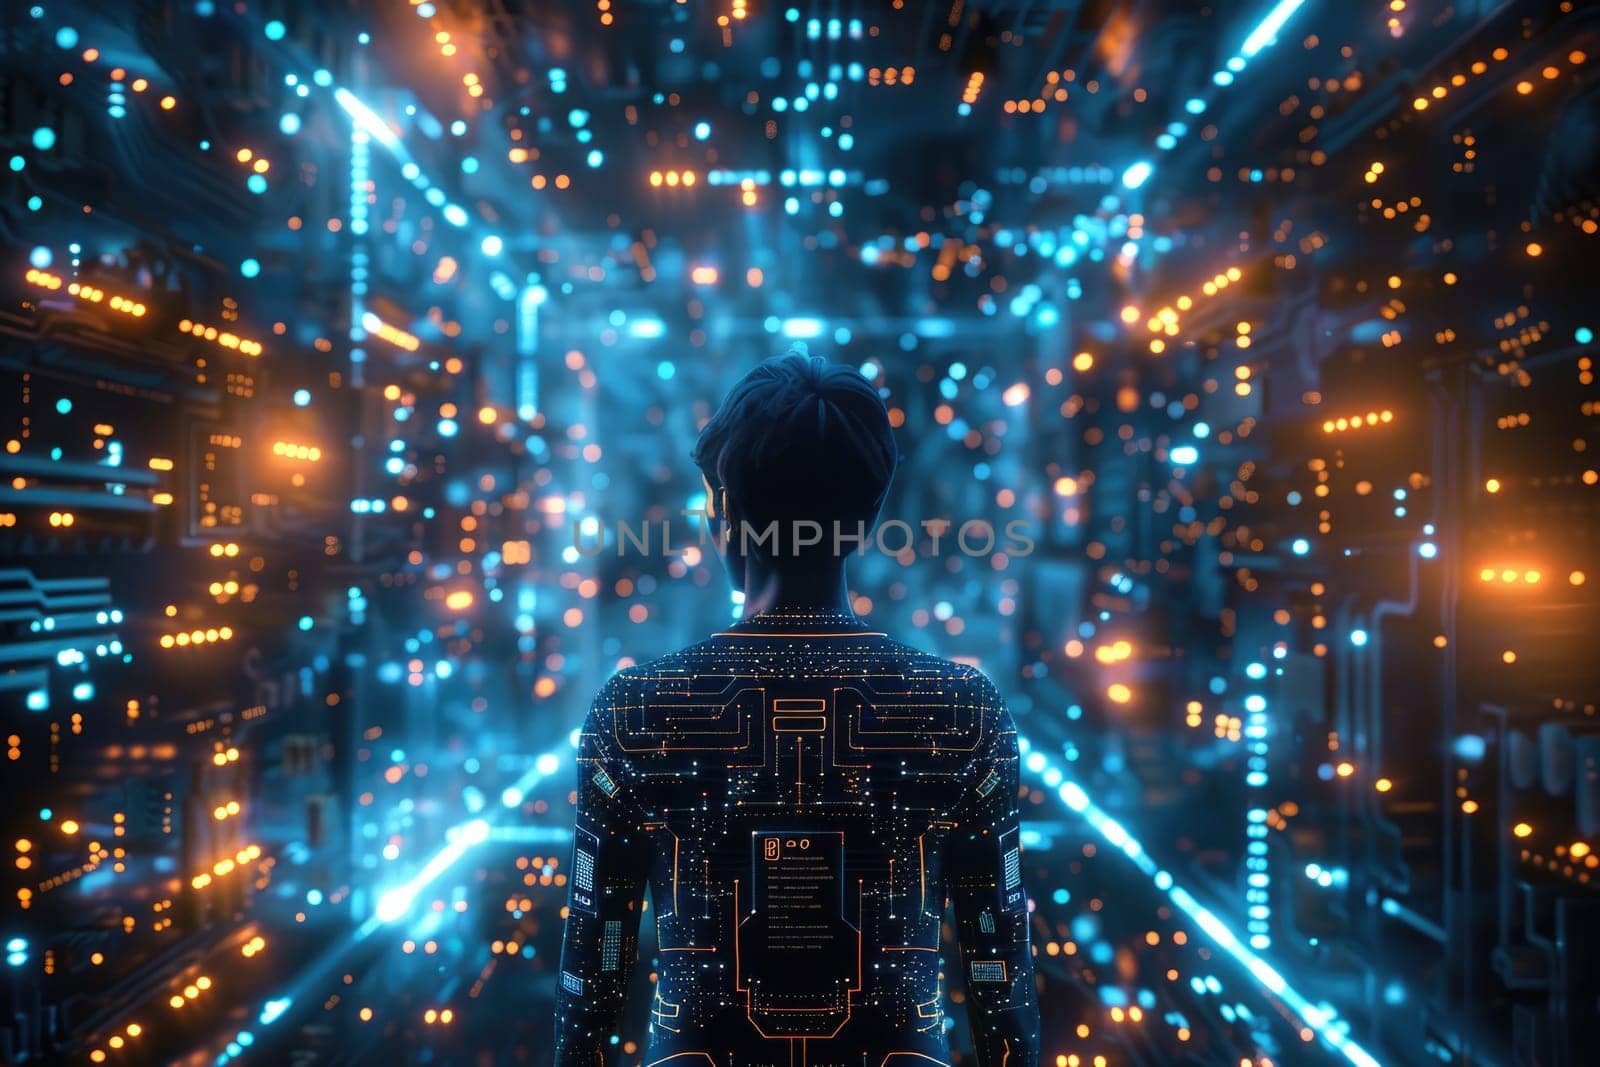 A man in a suit stands in a room full of glowing lights by wichayada